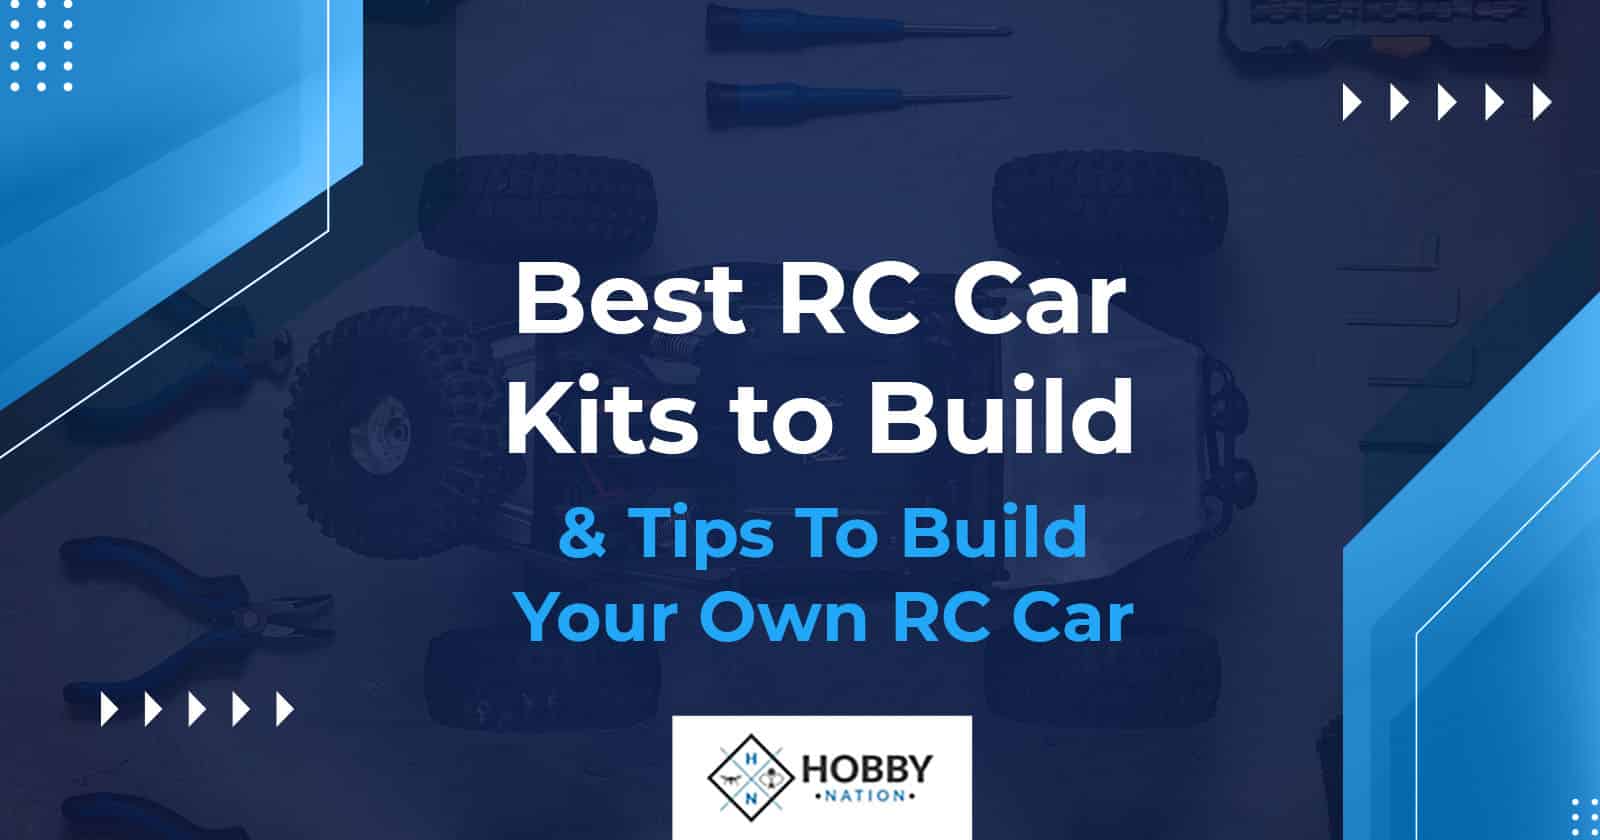 Best RC Car Kits To Build & Tips To Build Your Own RC Car